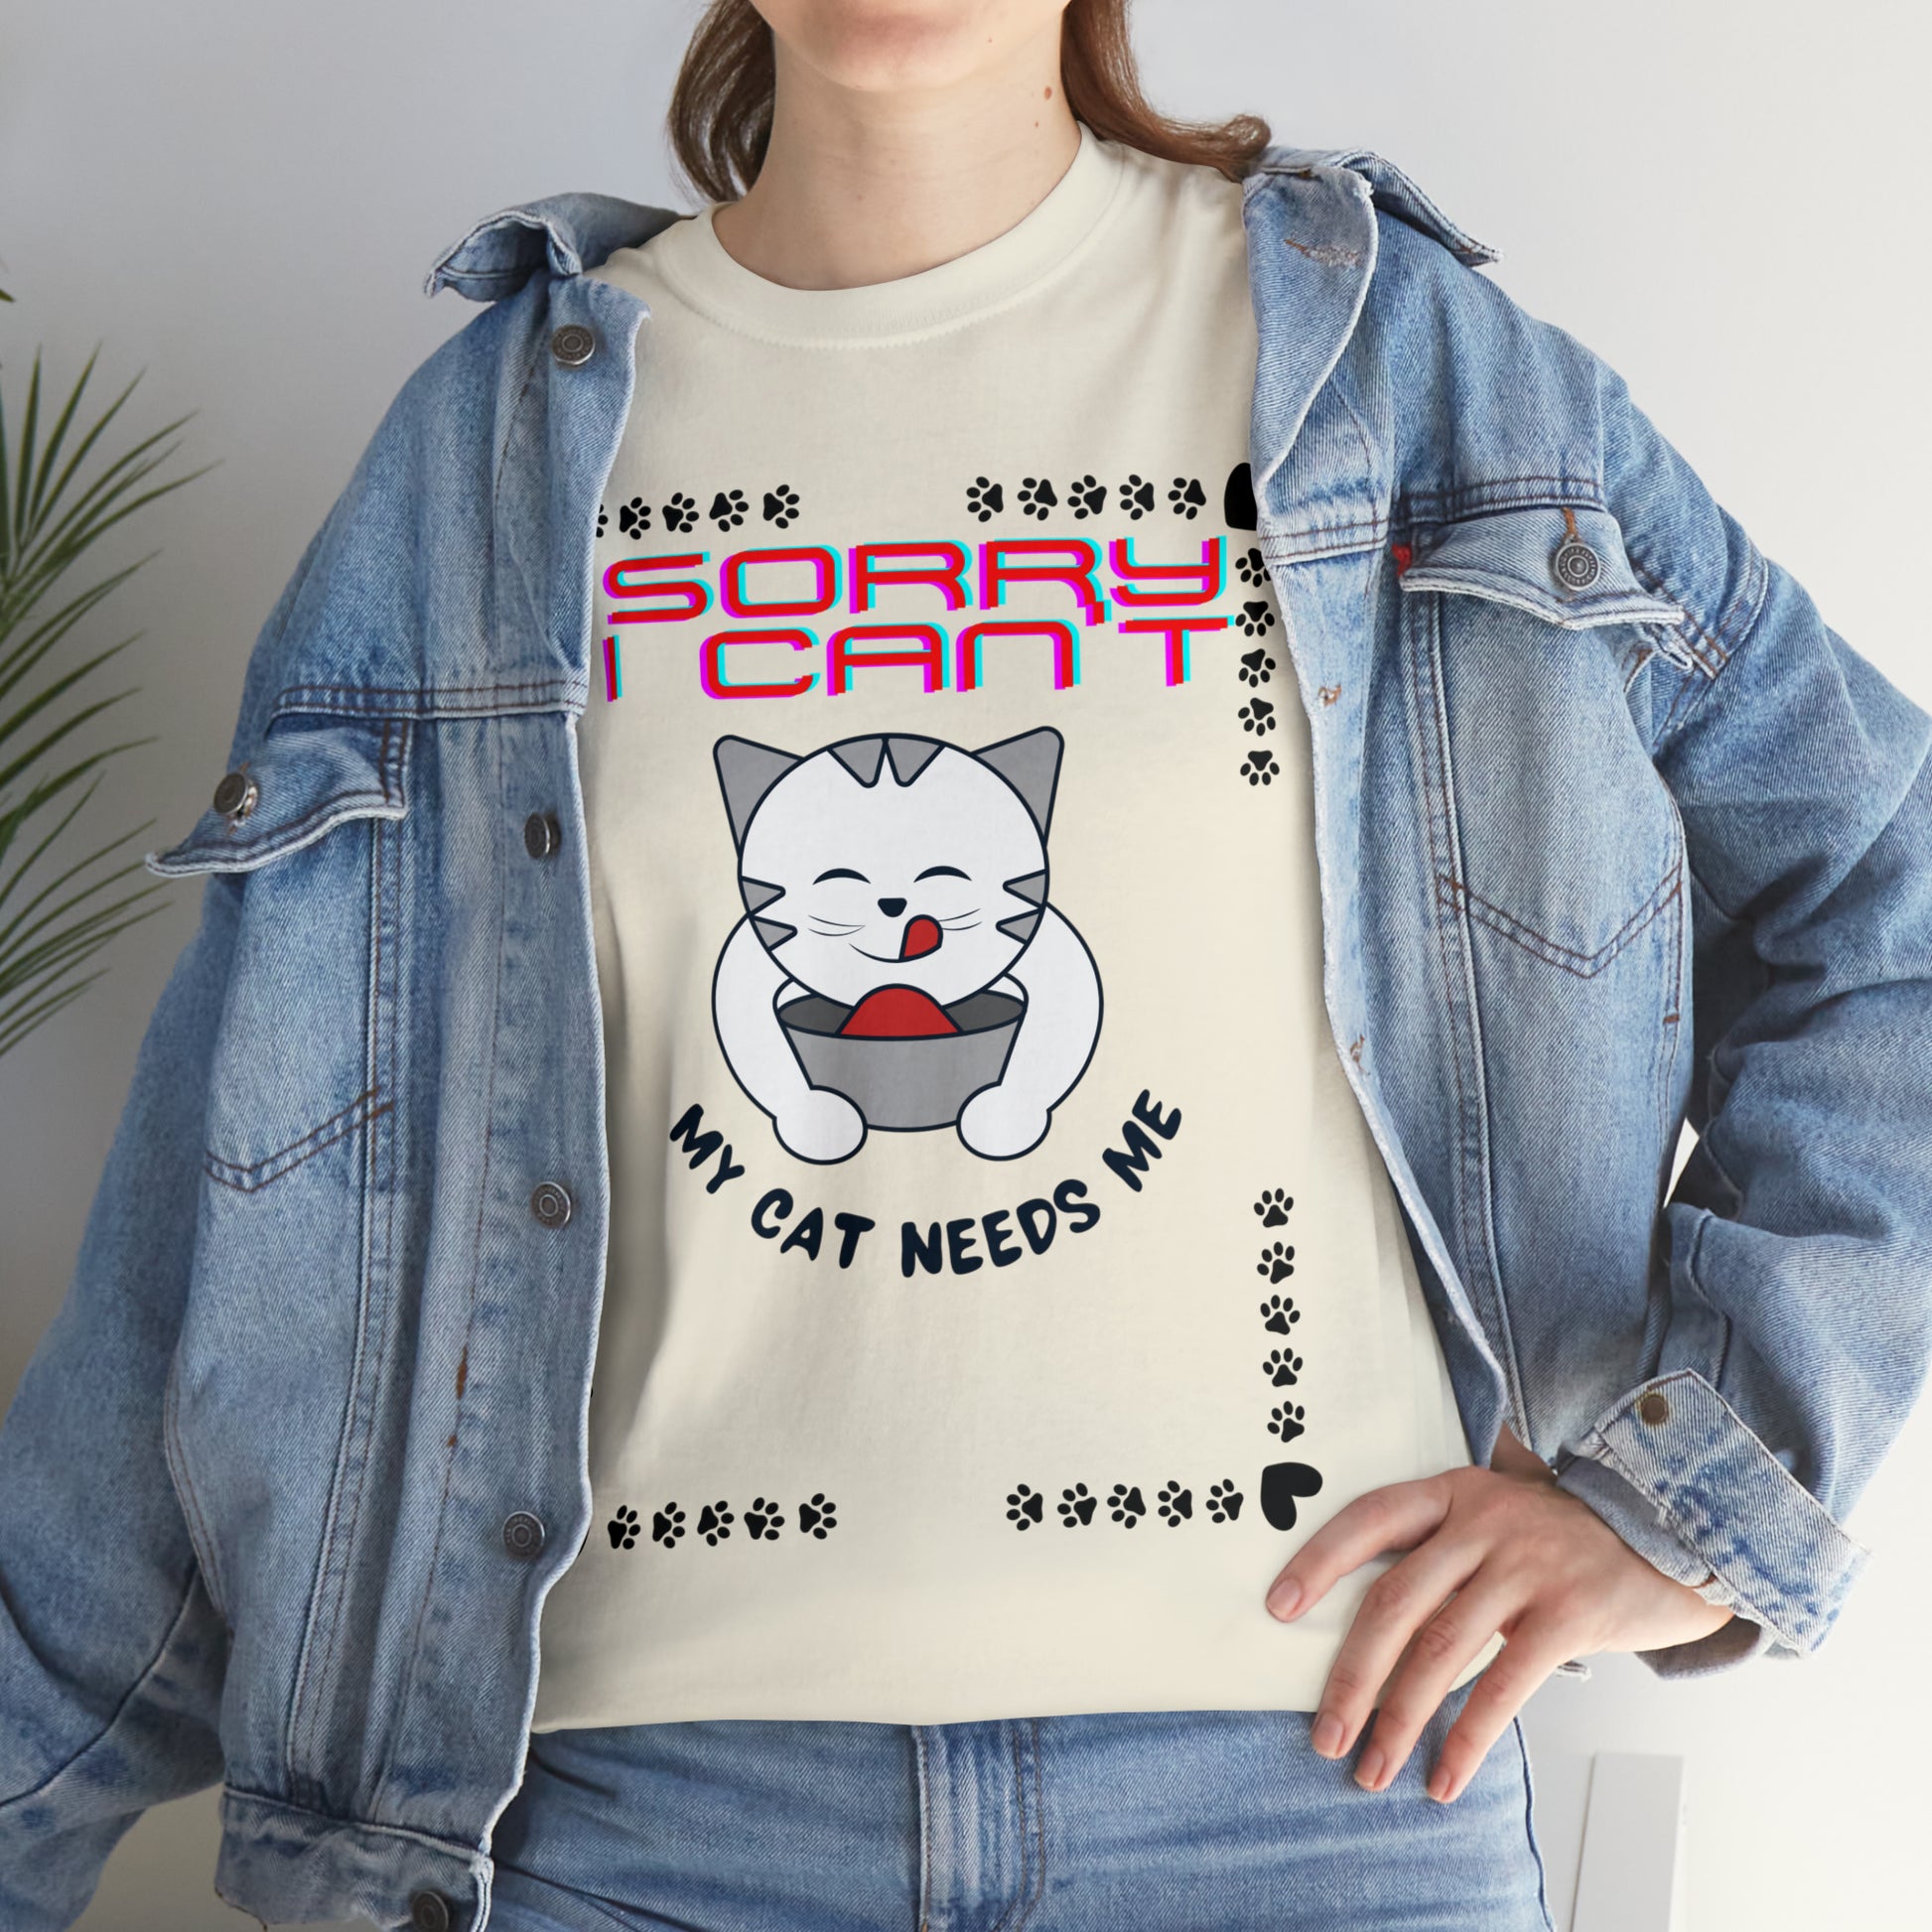 Sorry I Can't My Cat Needs Me T-Shirt | Cat Mom Shirt | Cat Lover Gift | Cat Mom Gift | Animal Lover Gift for Women T-Shirt Natural S 